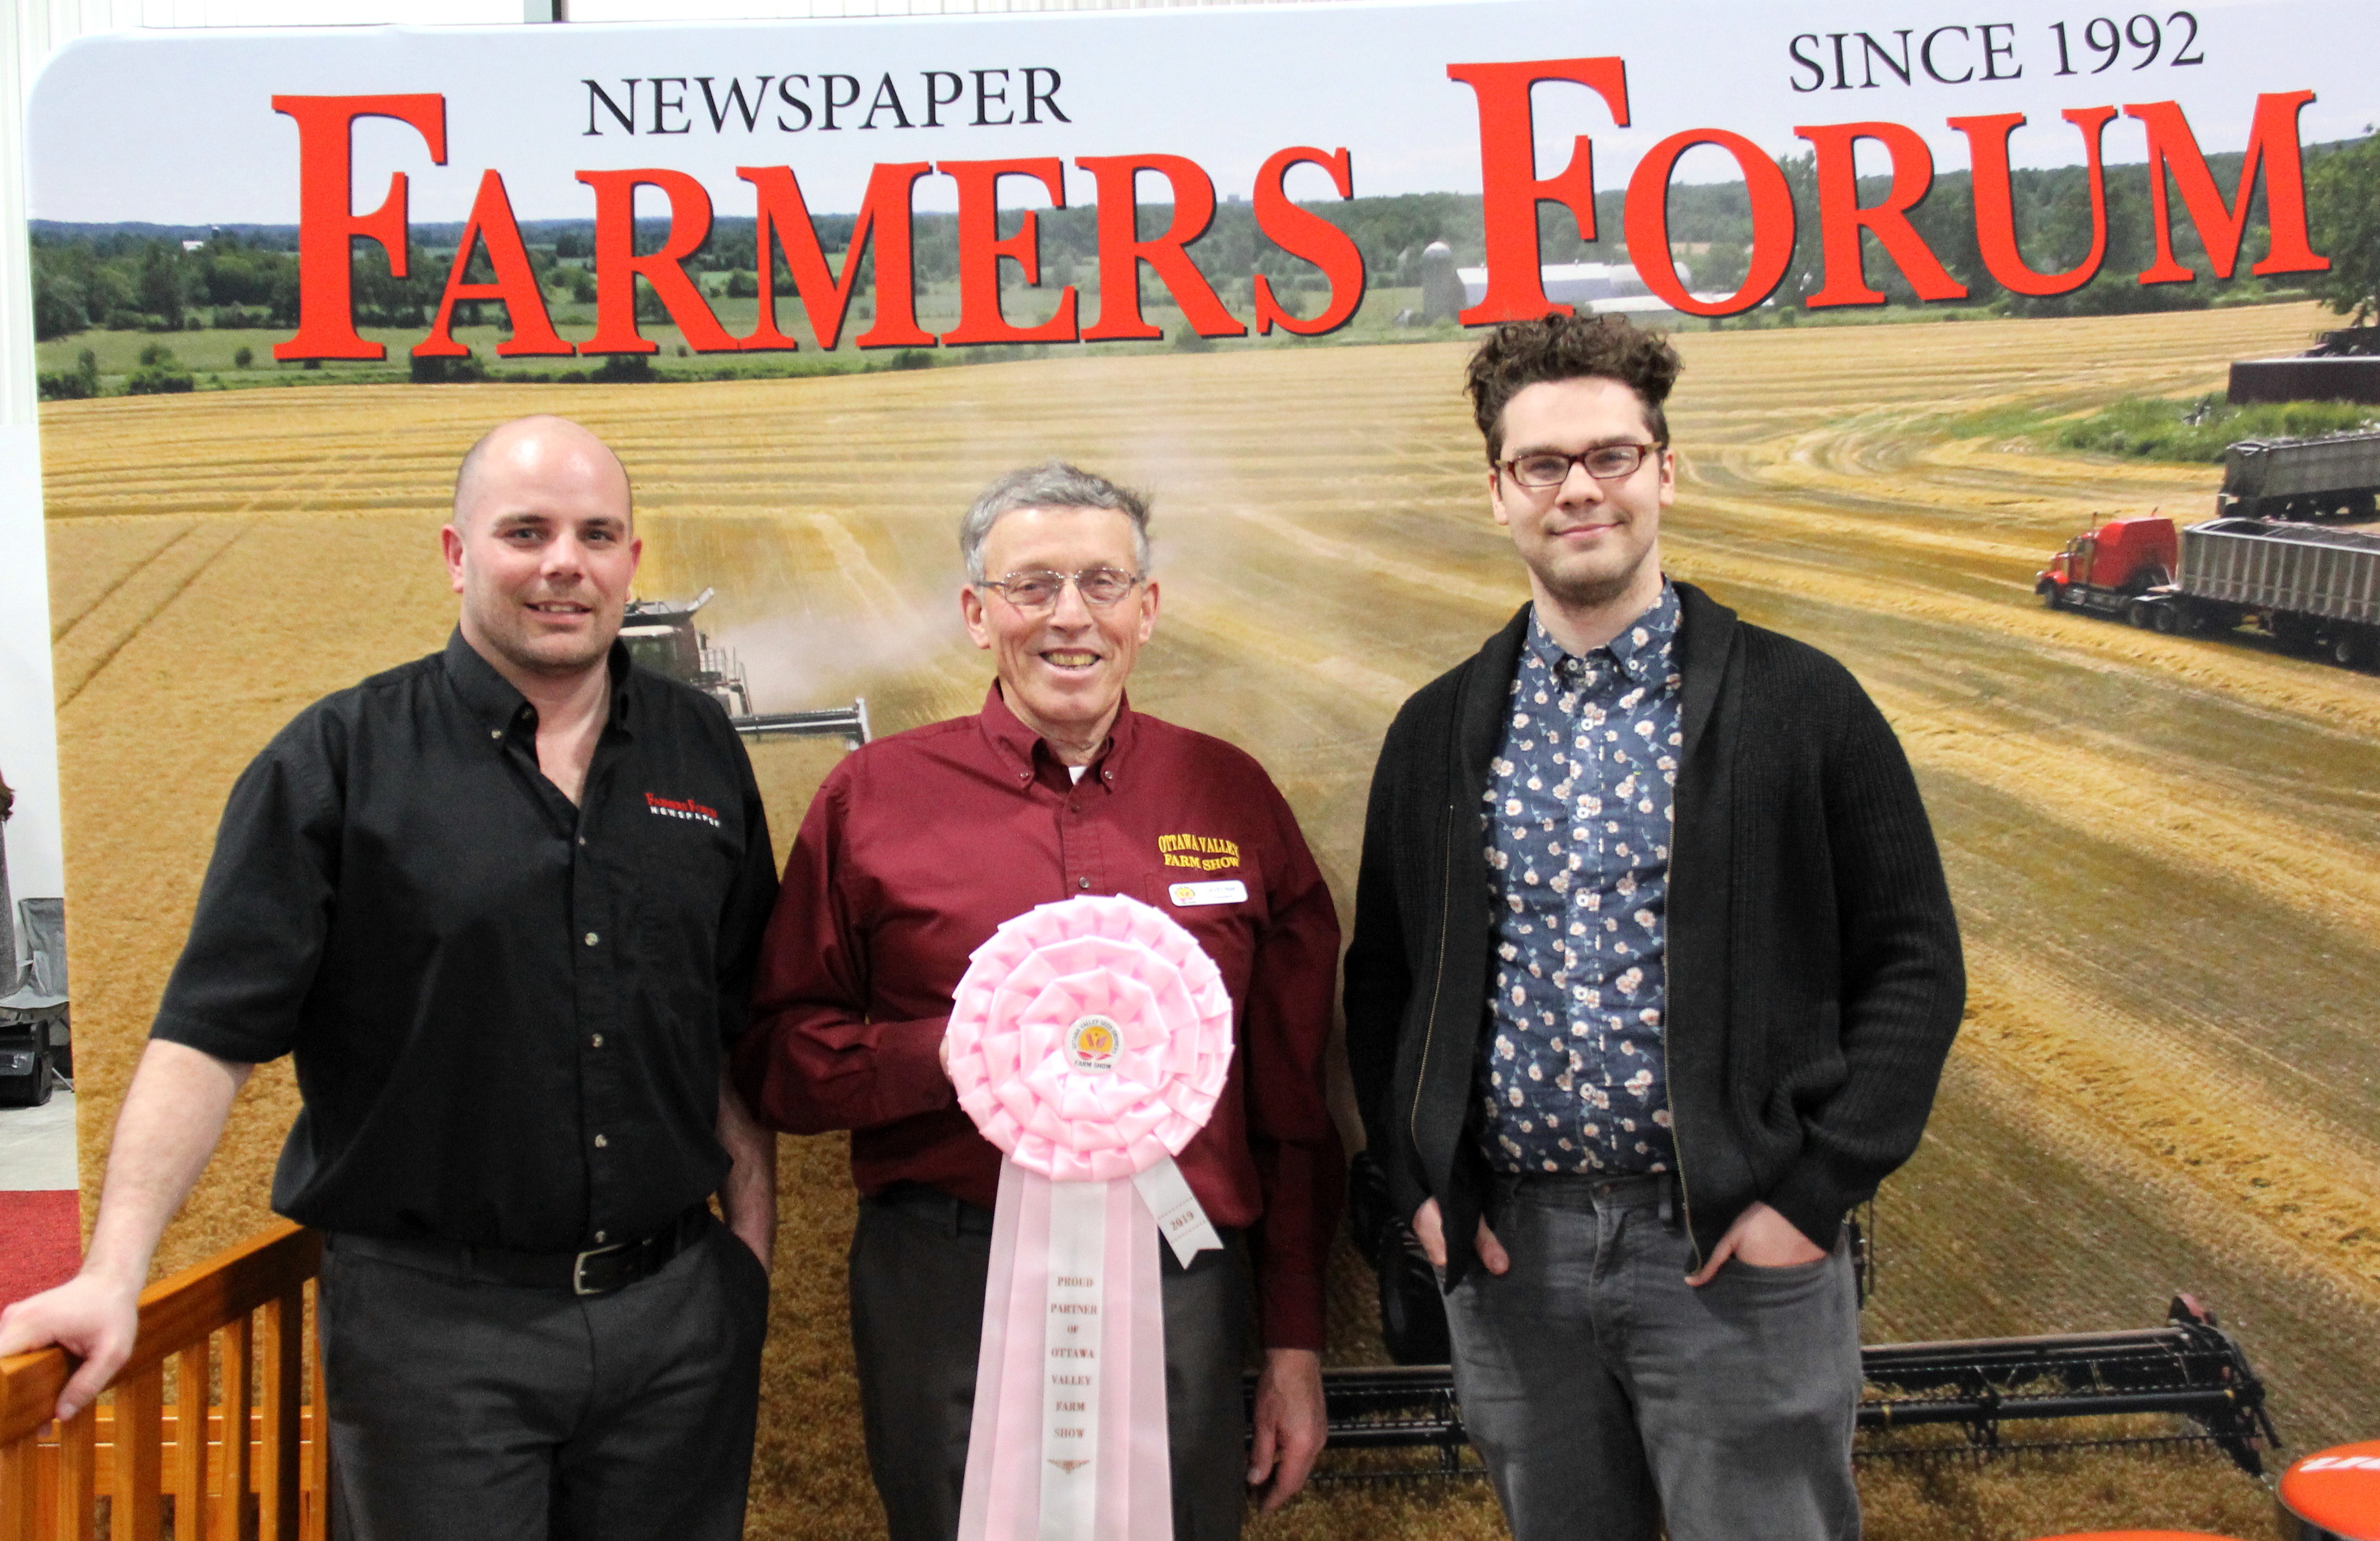 Three men standing in front of a farmers forum sign.